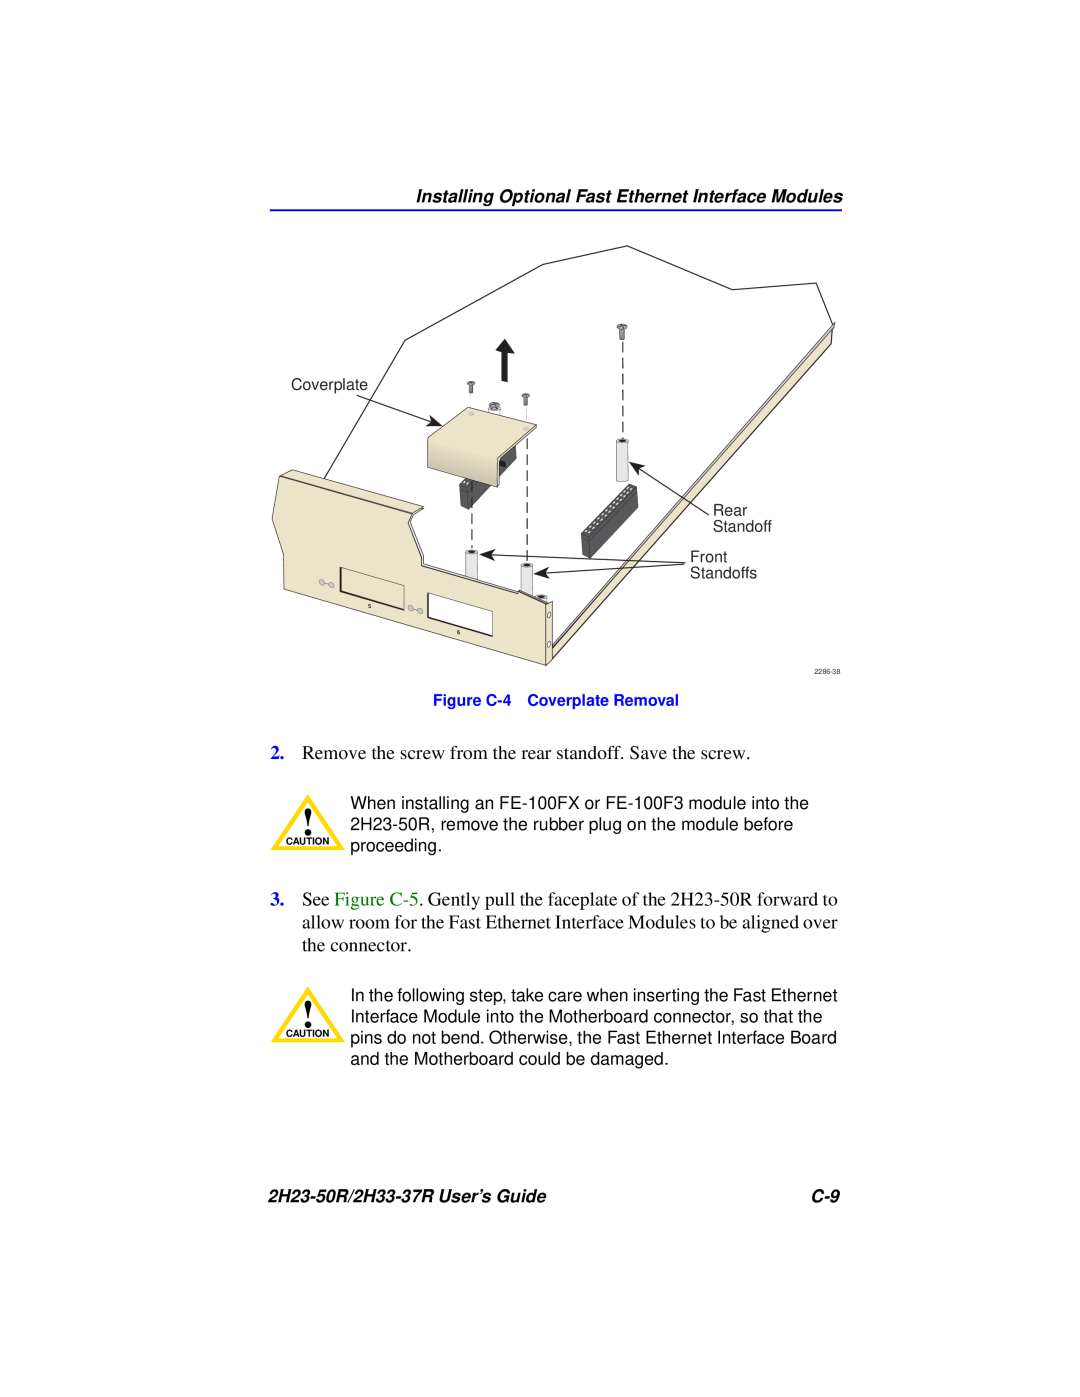 Cabletron Systems manual Remove the screw from the rear standoff. Save the screw, 2H23-50R/2H33-37R User’s Guide 